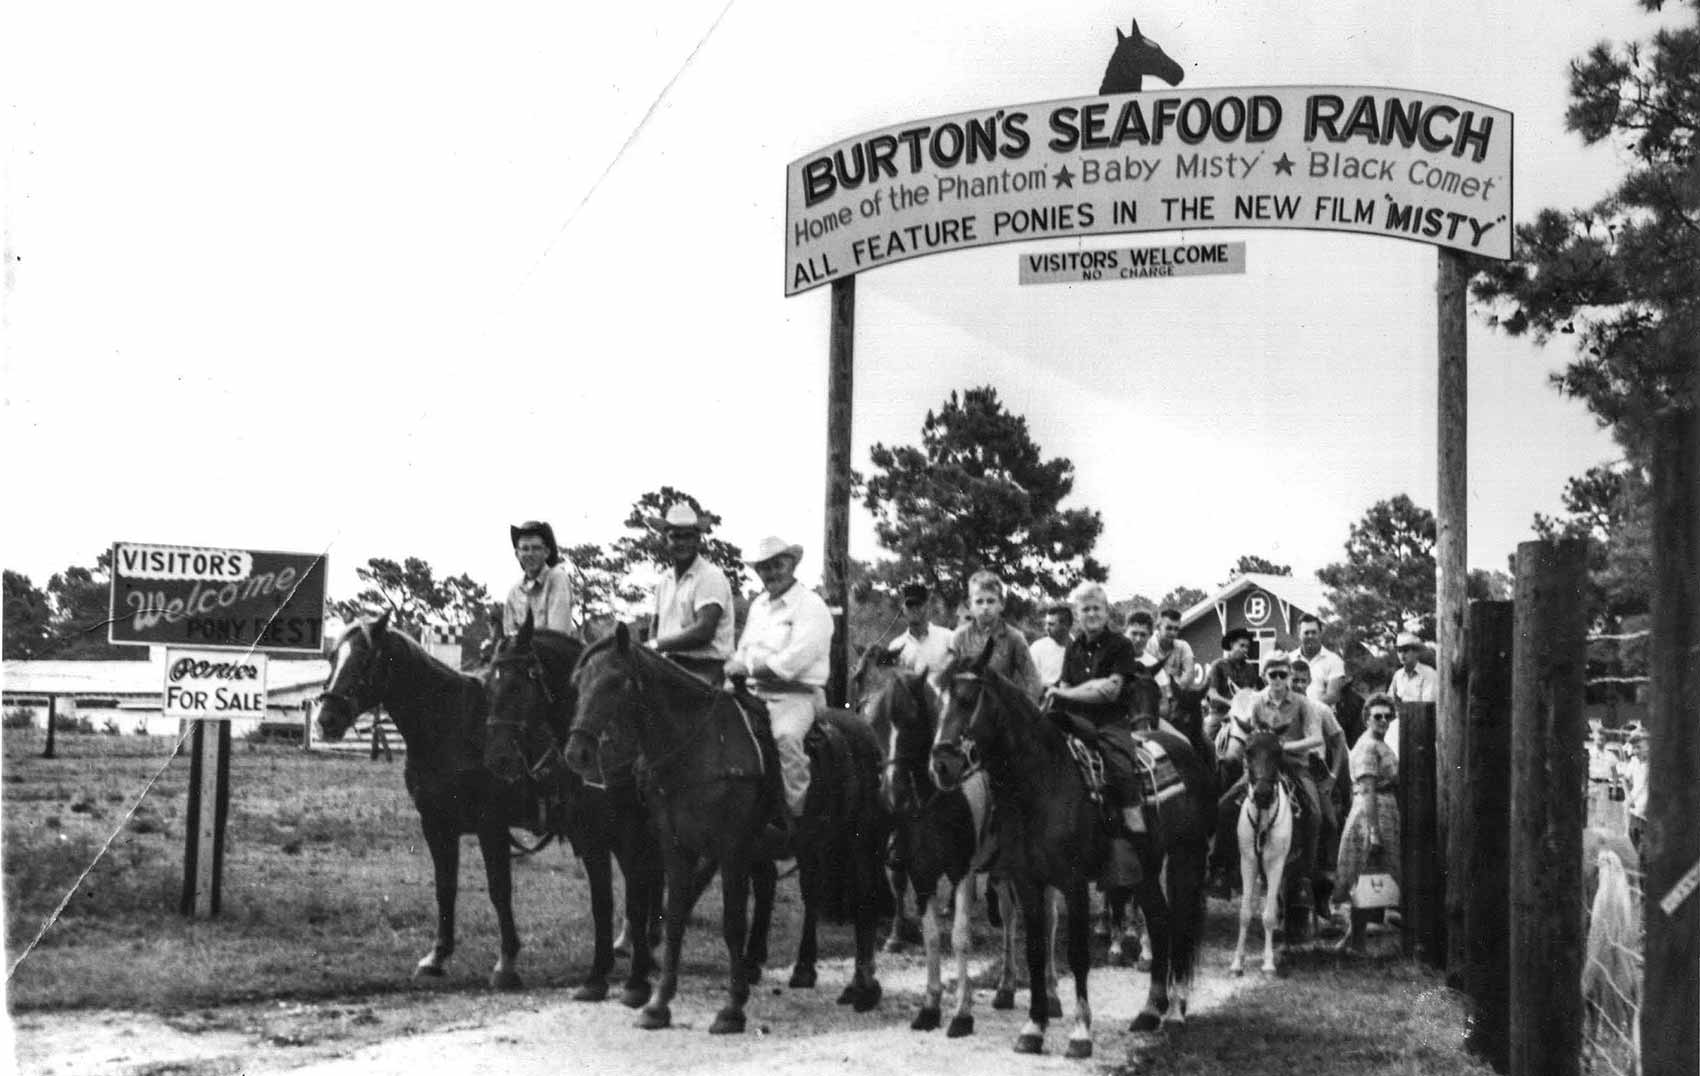 home of misty, burton's seafood ranch